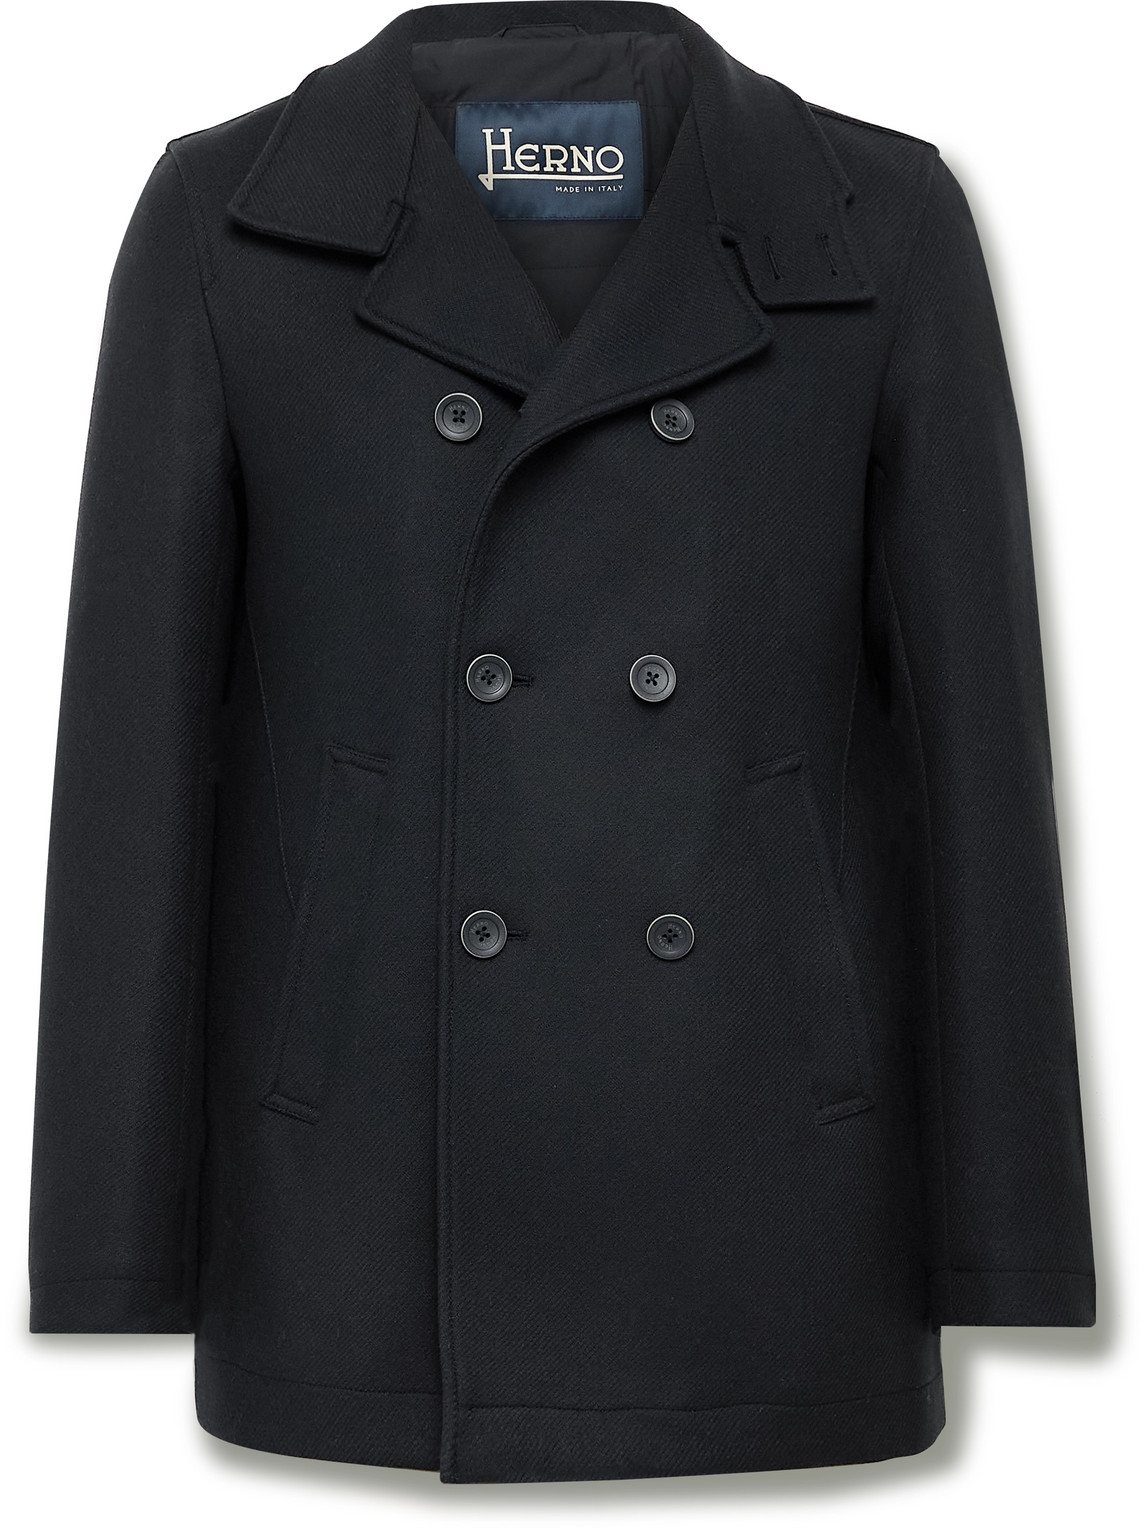 HERNO DOUBLE-BREASTED WOOL-BLEND TWILL PEACOAT